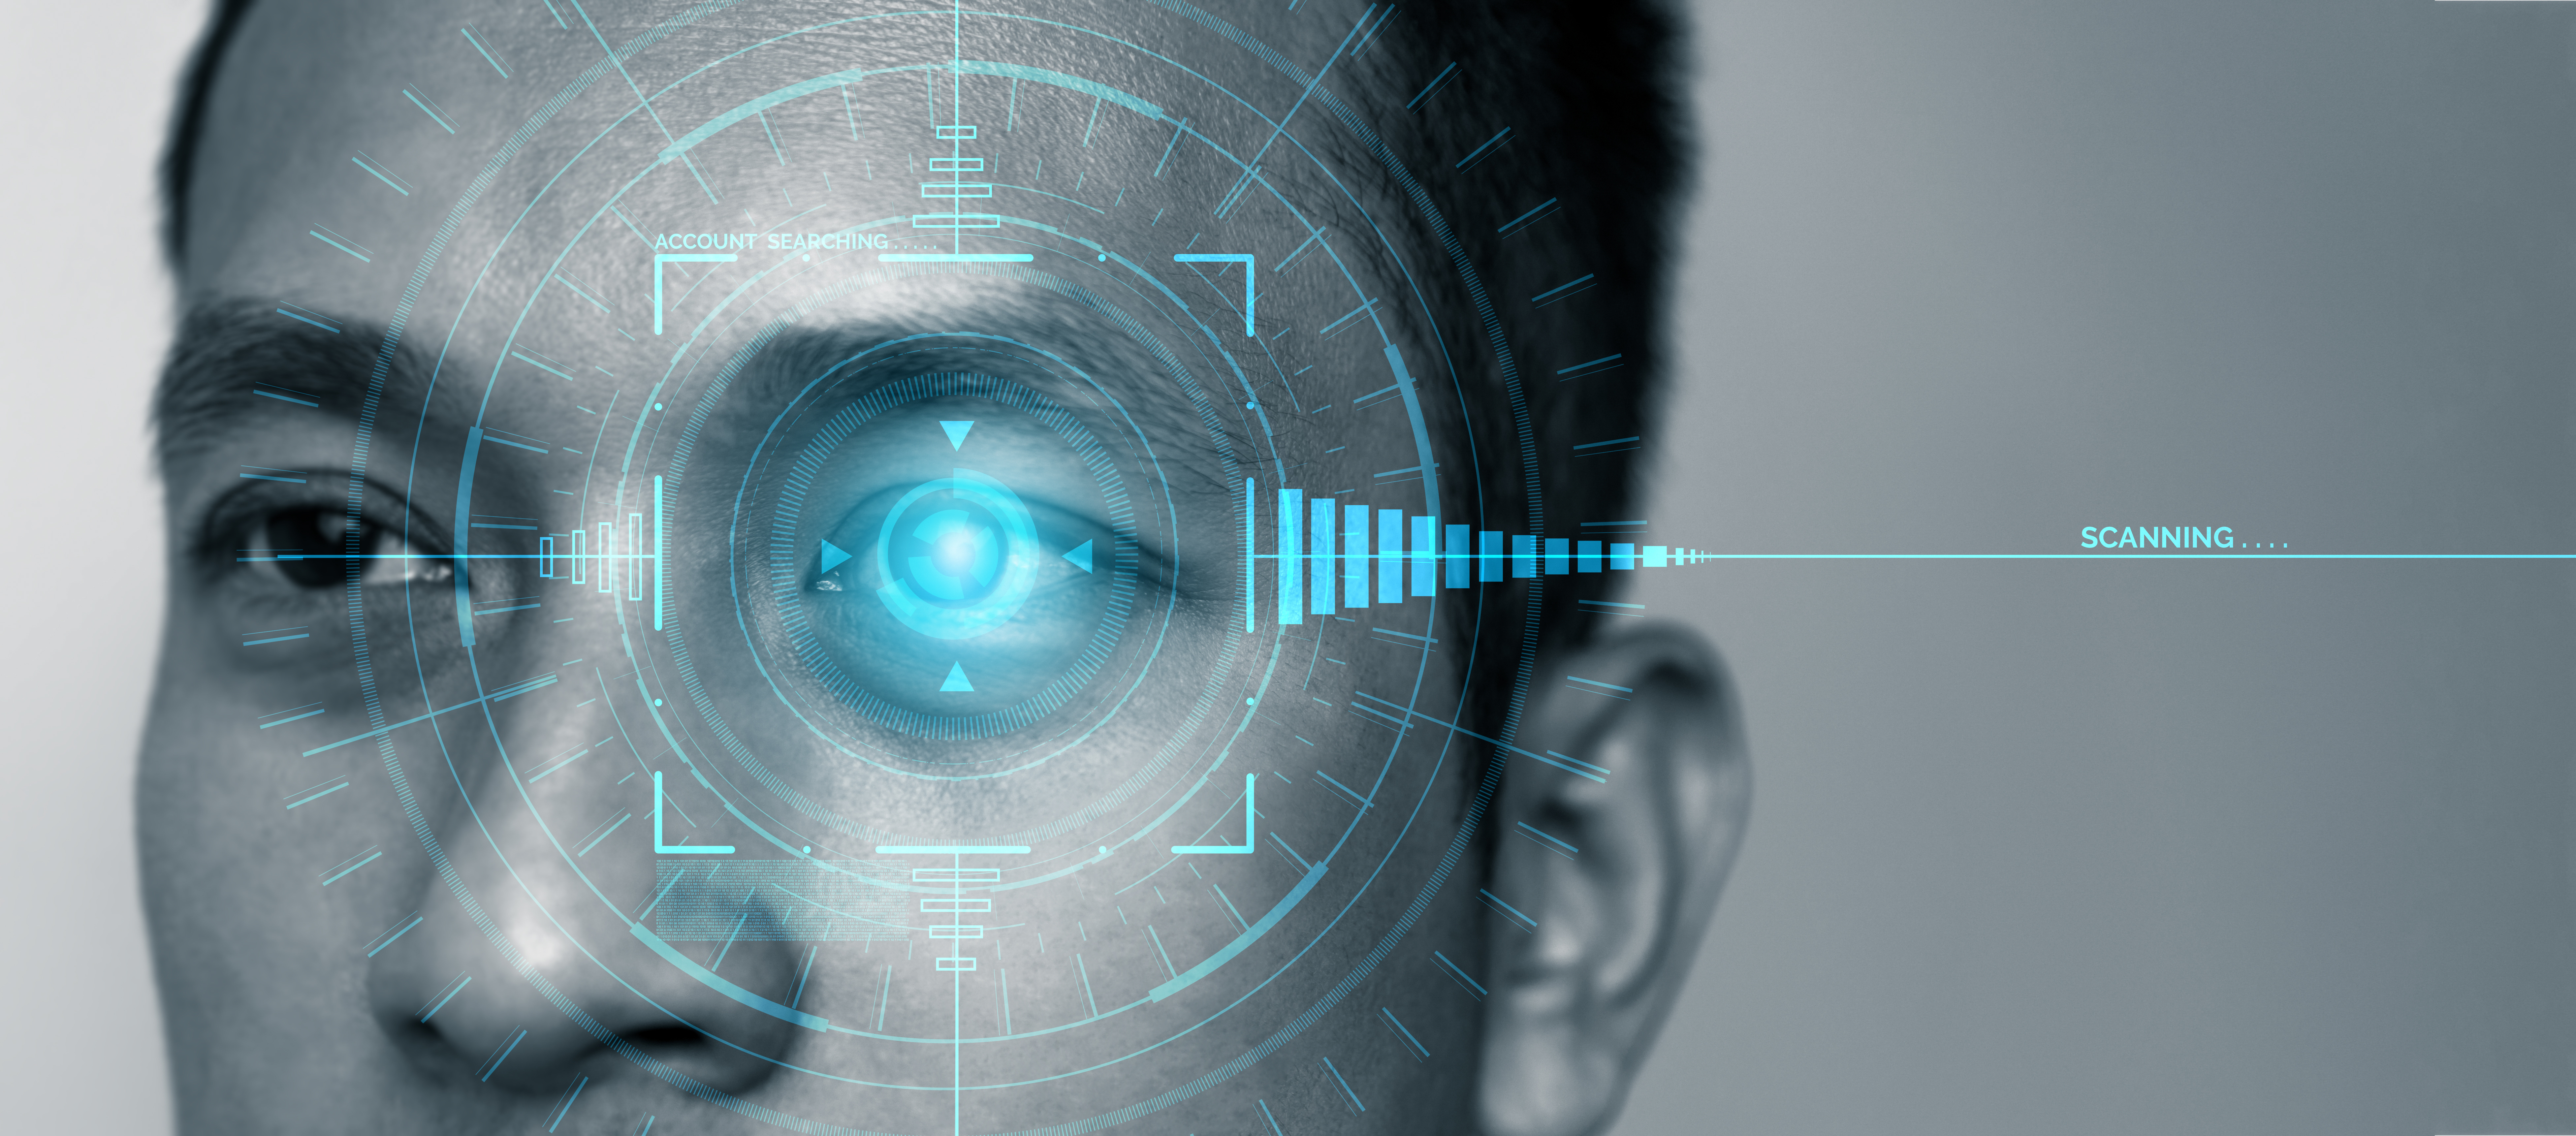 Future cyber security data protection by biometrics scanning with human eye to unlock and give access to private digital data. Futuristic technology innovation concept.